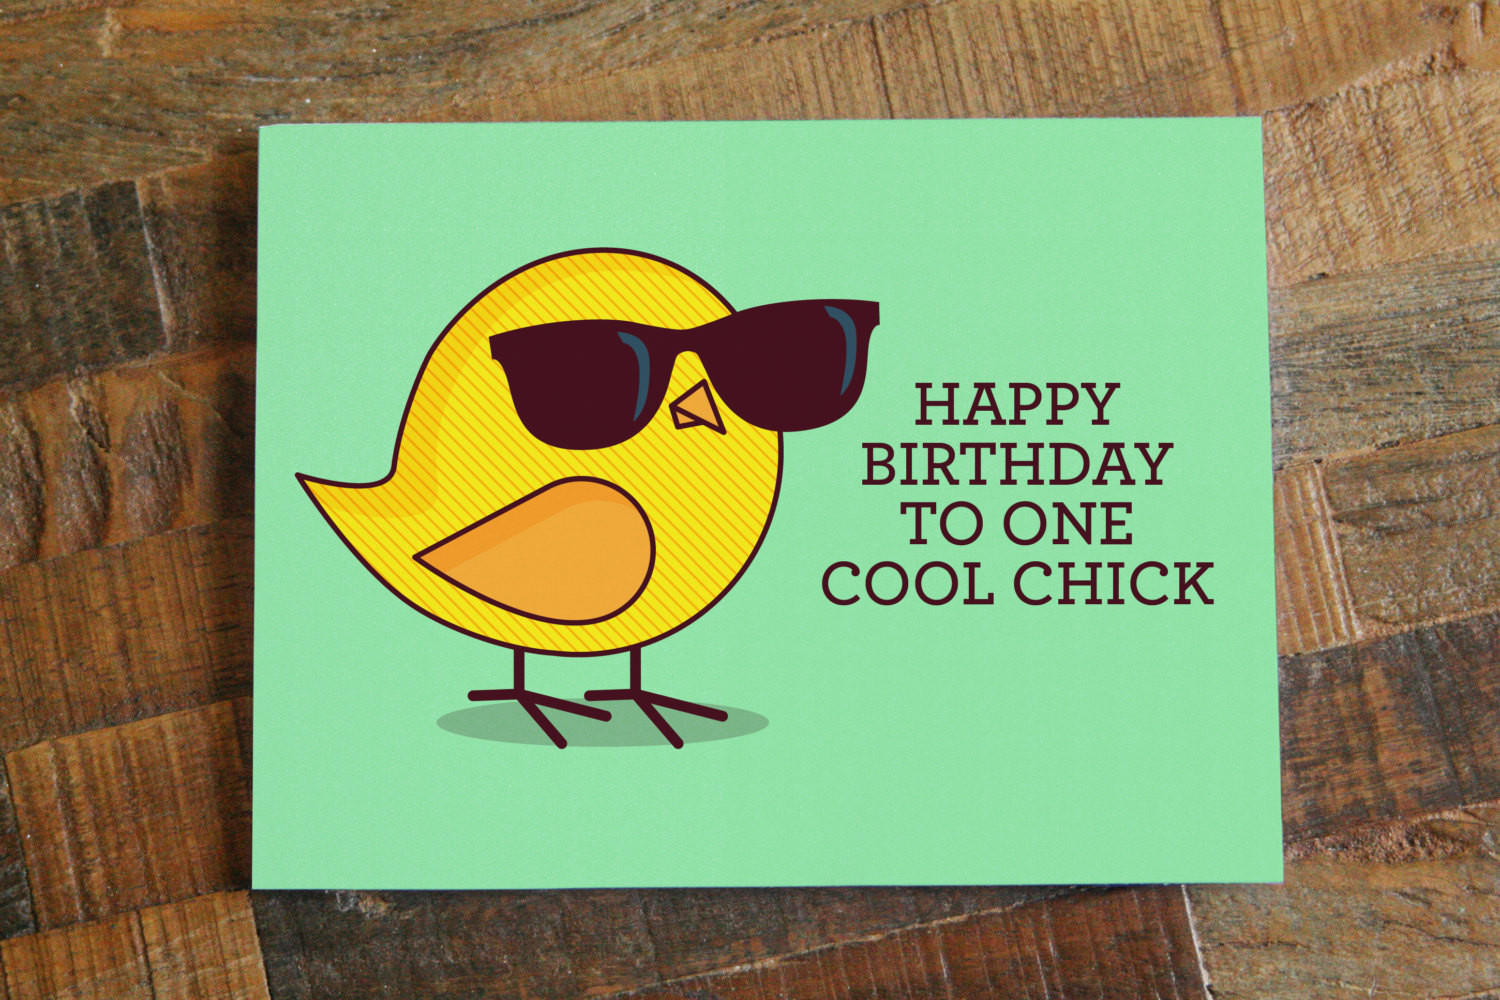 Funny Birthday Quotes For Women
 Funny Birthday Card For Her "Happy Birthday to e Cool